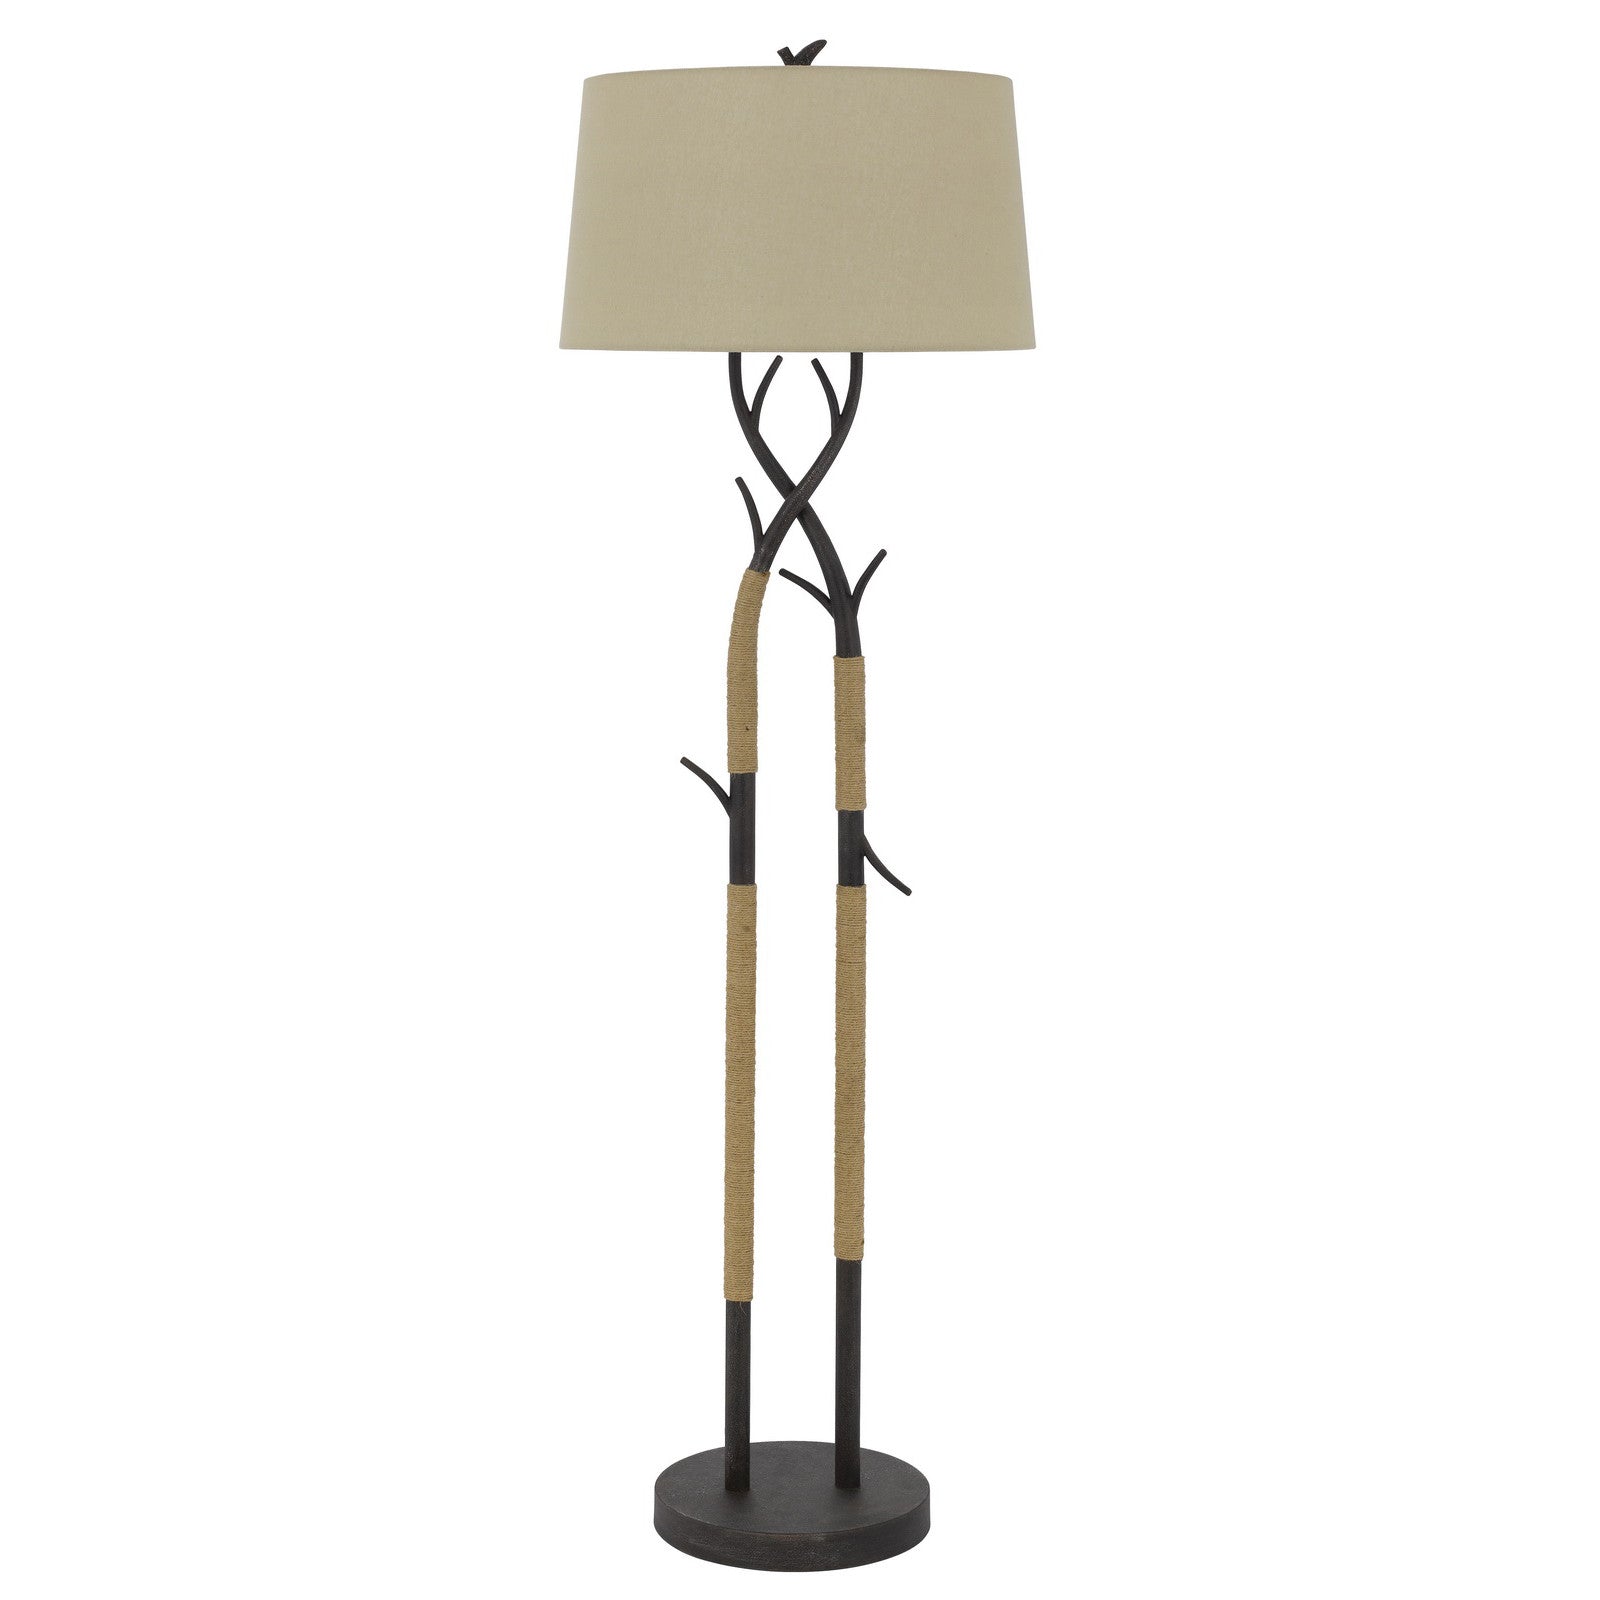 55" Black Traditional Shaped Floor Lamp With Tan Rectangular Shade